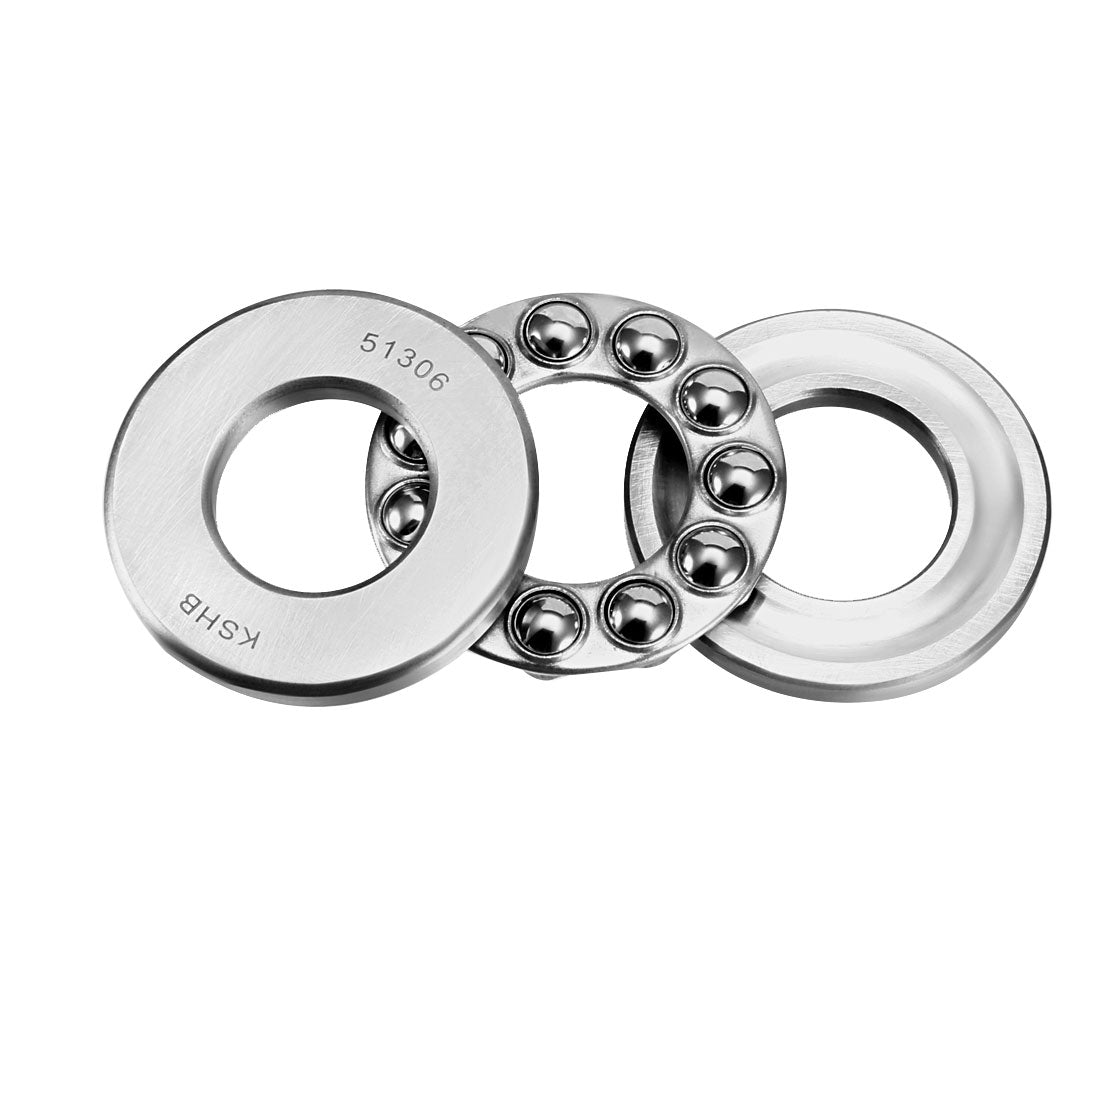 uxcell Uxcell 51306 Single Direction Thrust Ball Bearings 30mm x 60mm x 21mm Chrome Steel